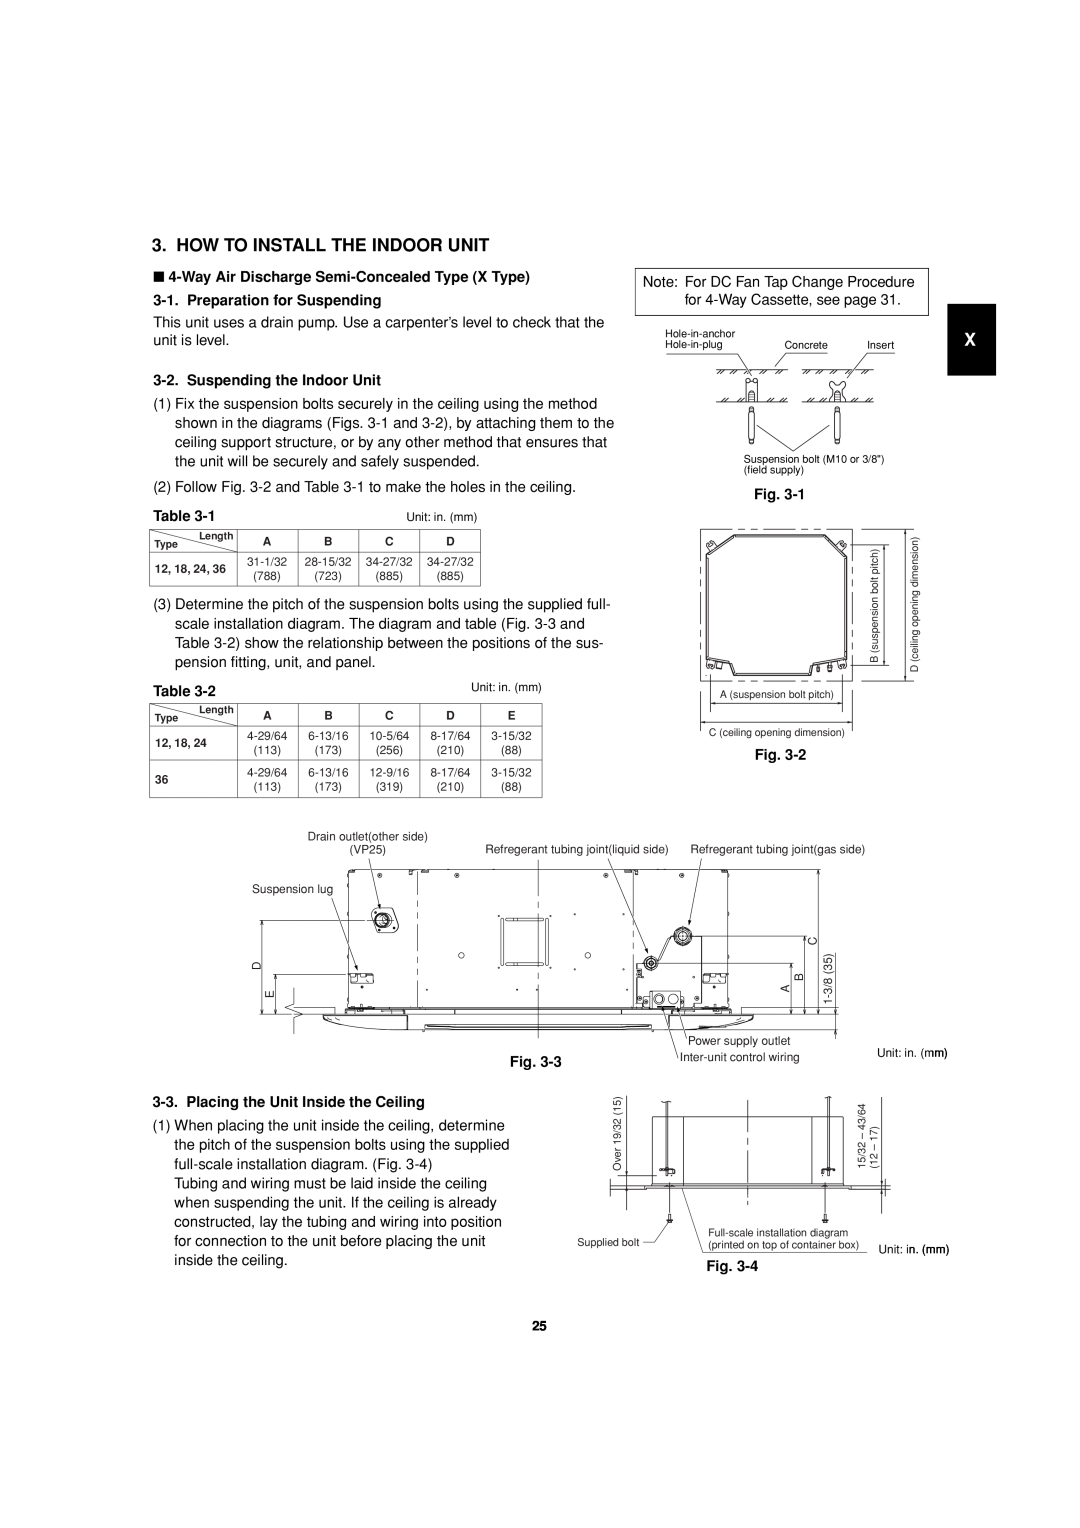 Sanyo 85464359981002 installation instructions How To Install The Indoor Unit, Suspending the Indoor Unit, Table, Fig 